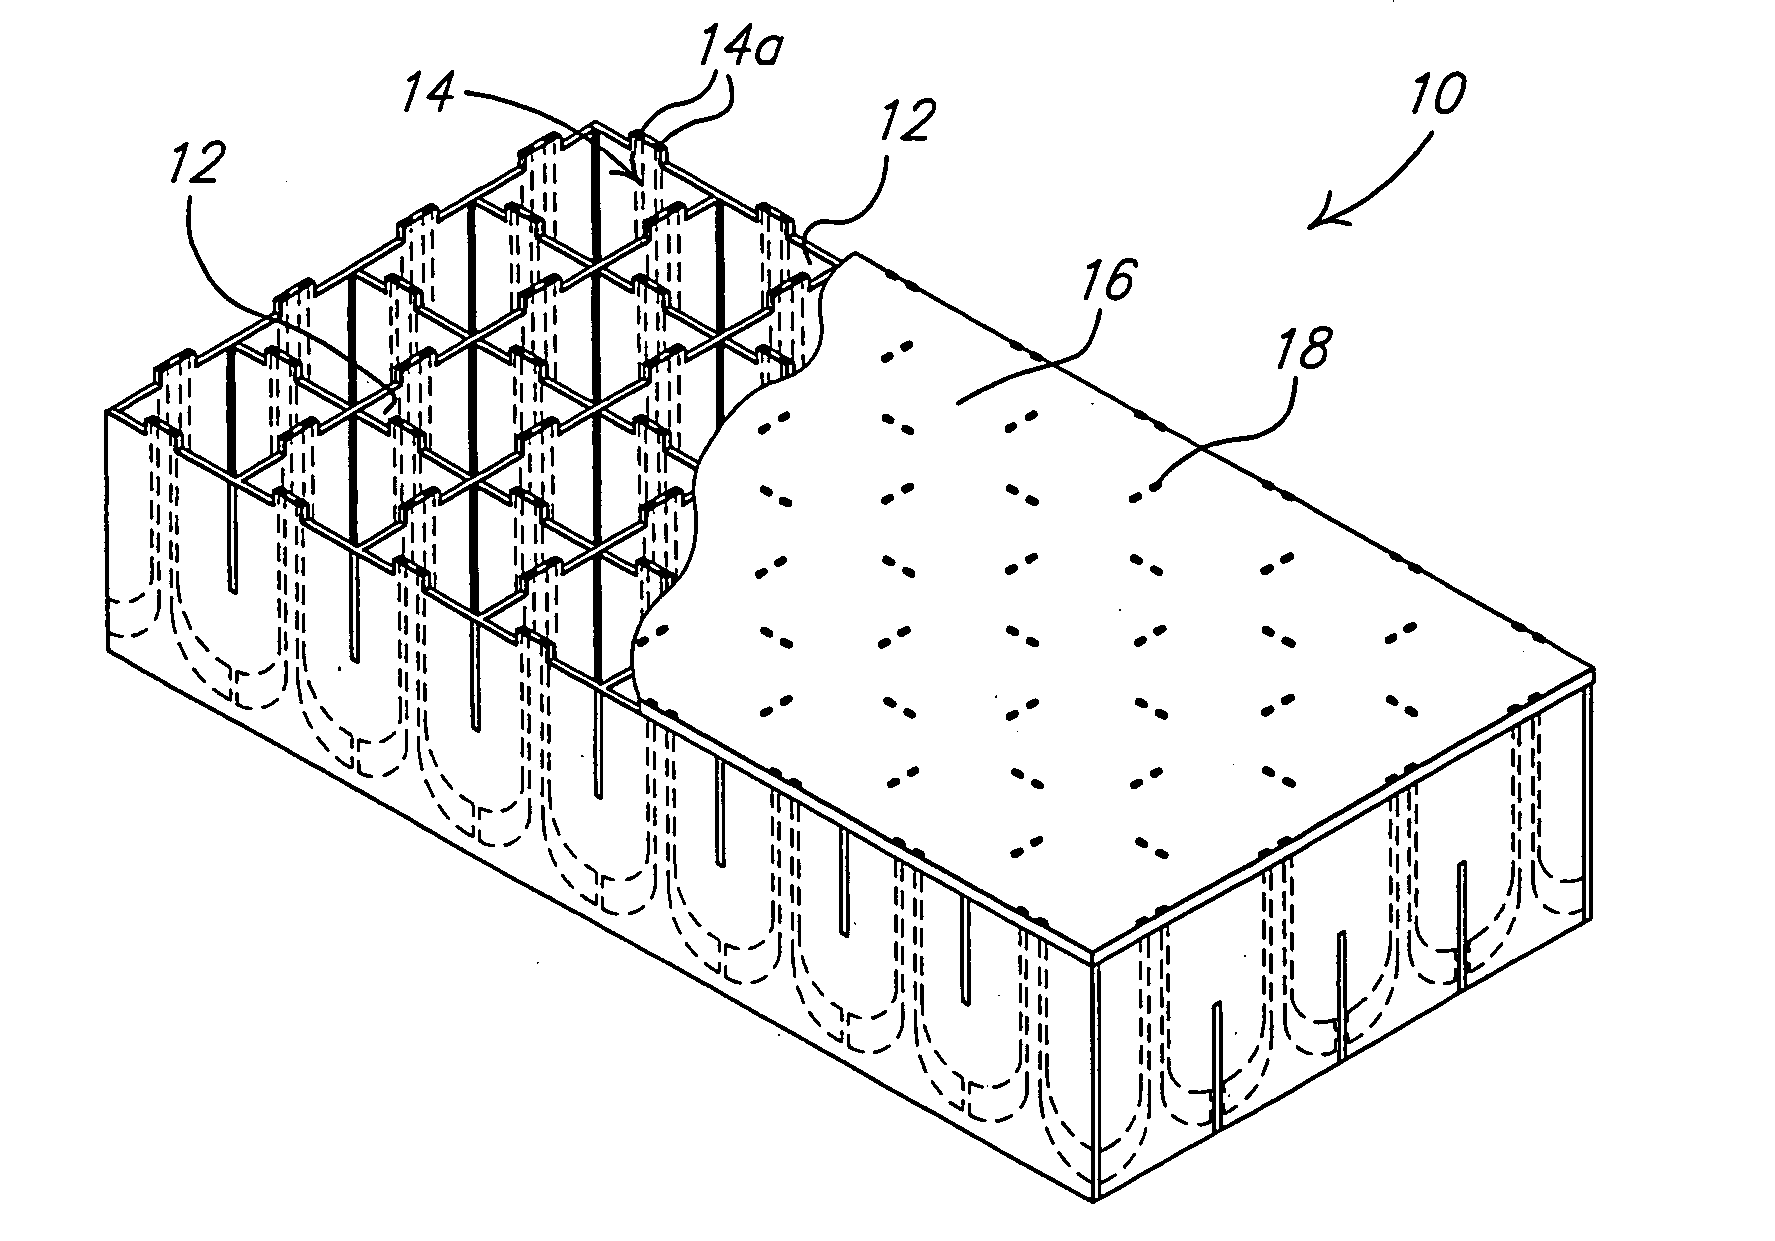 Design and fabrication methodology for a phased array antenna with shielded/integrated feed structure